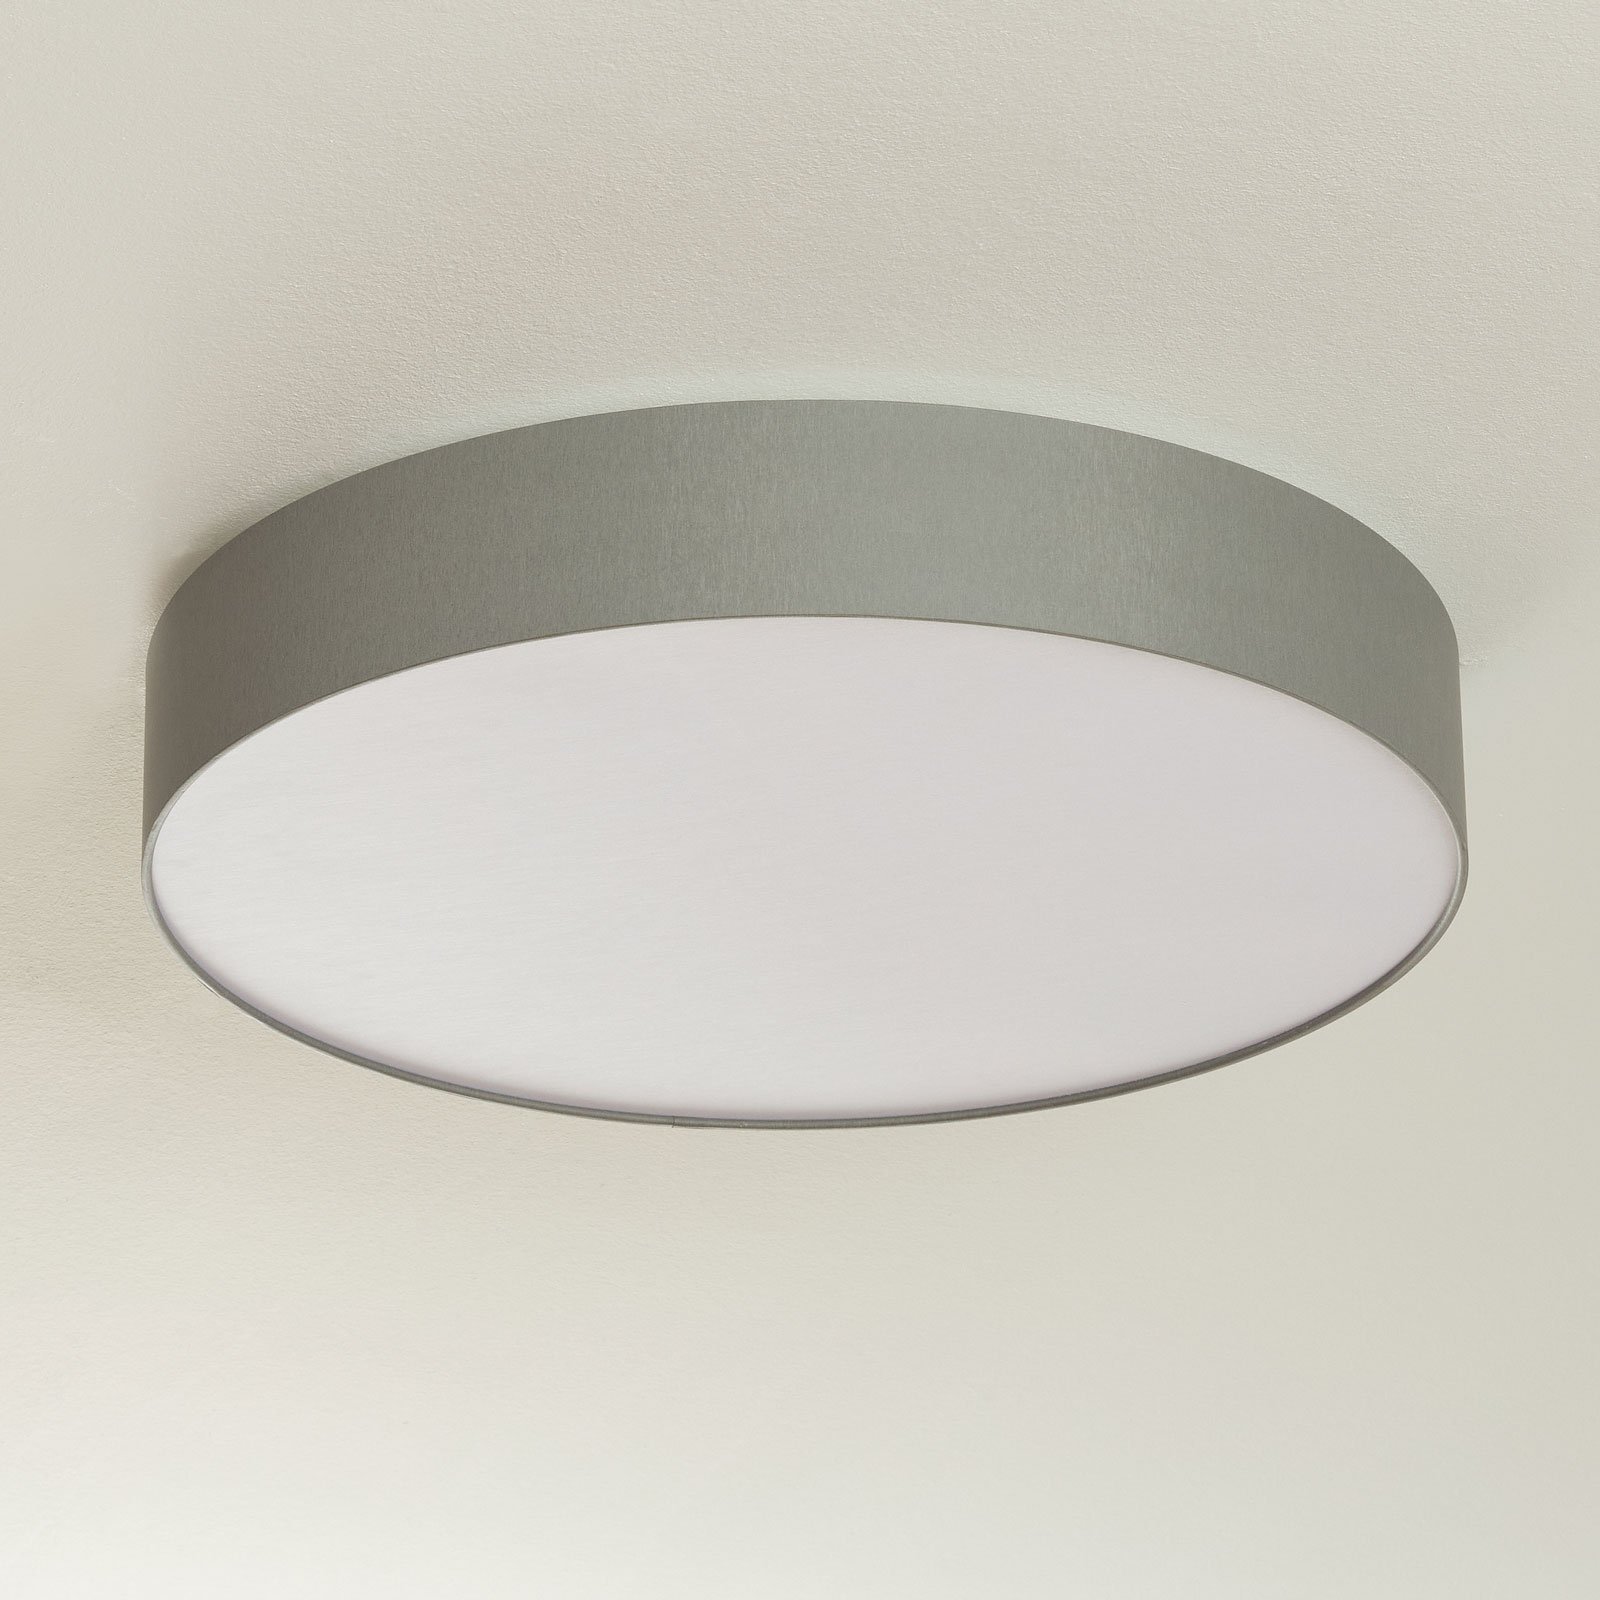 Dimmable Luno LED ceiling light, light grey